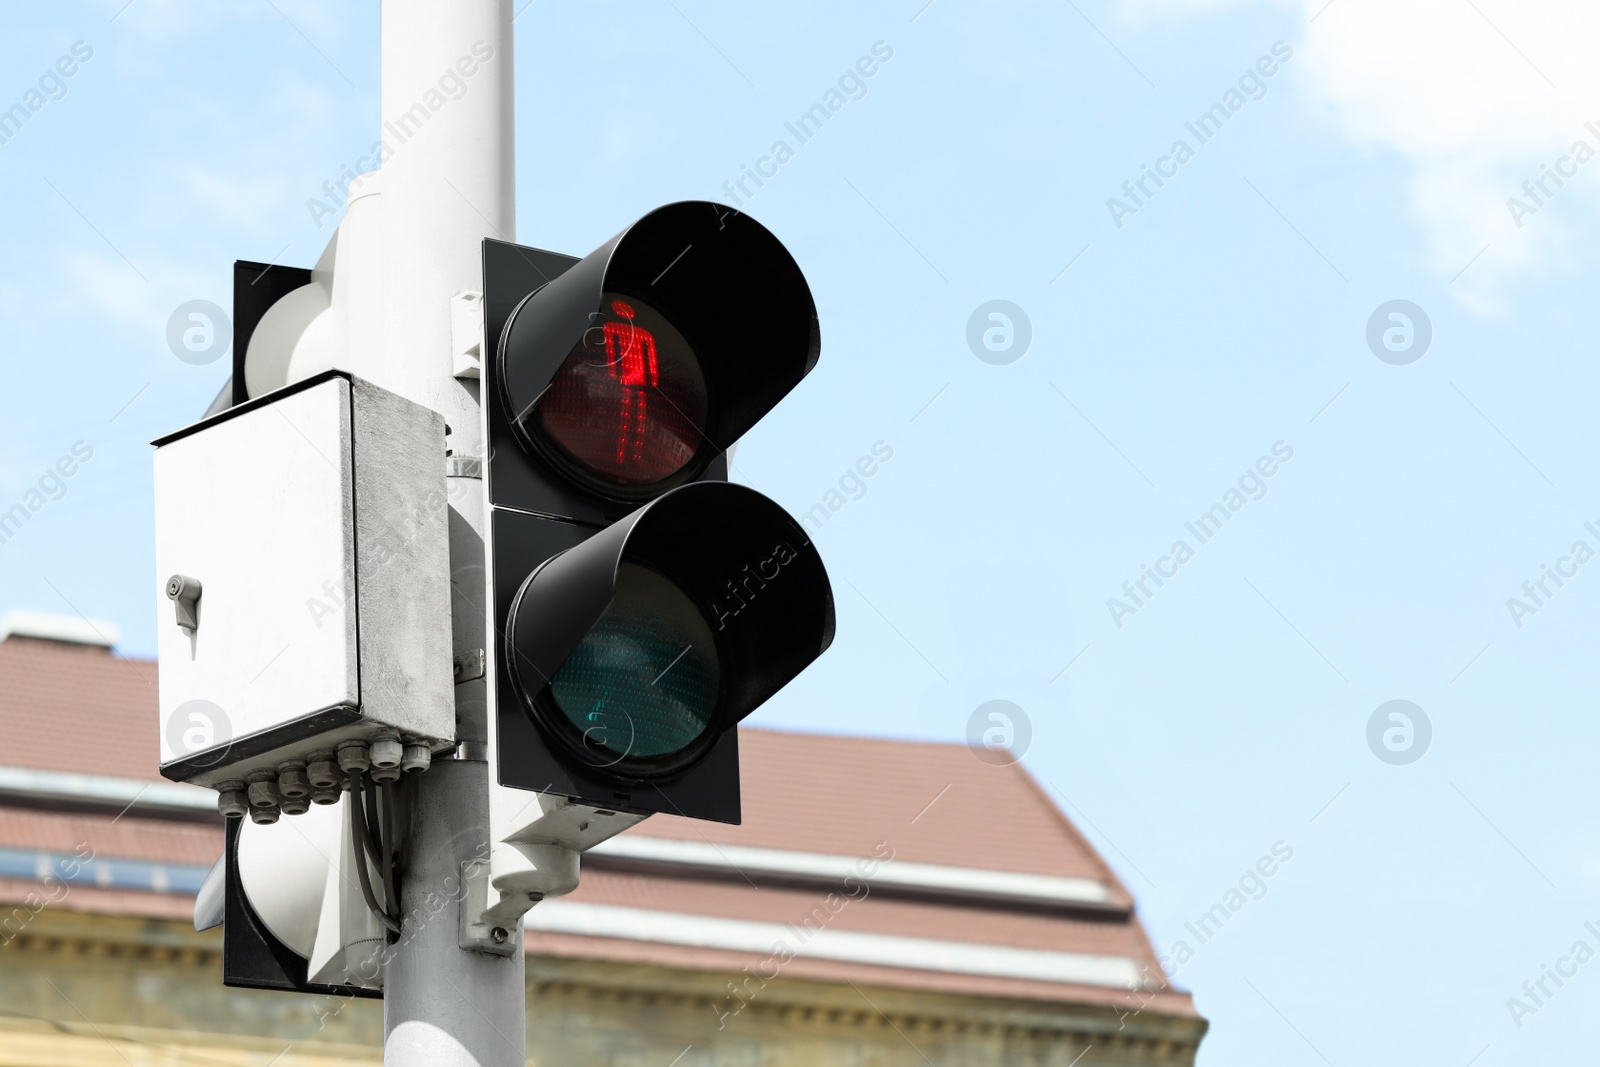 Photo of Post with traffic light for pedestrians in city